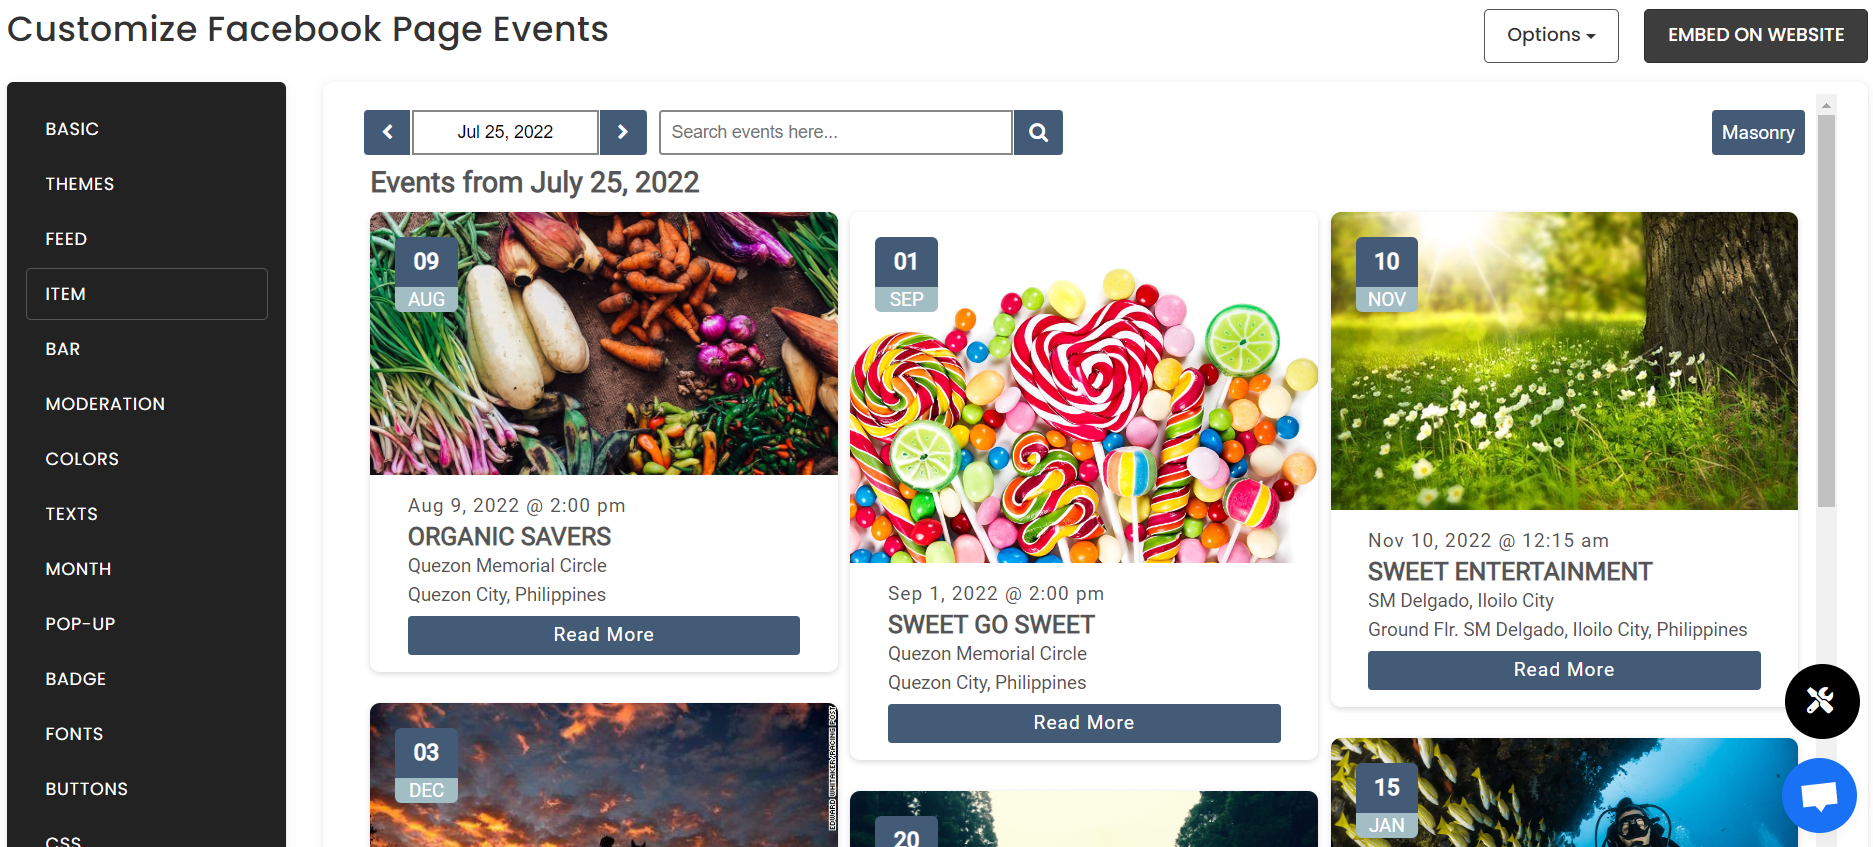 Customize your feed - How To Embed Facebook Page Events On Pinegrow Website For Free?